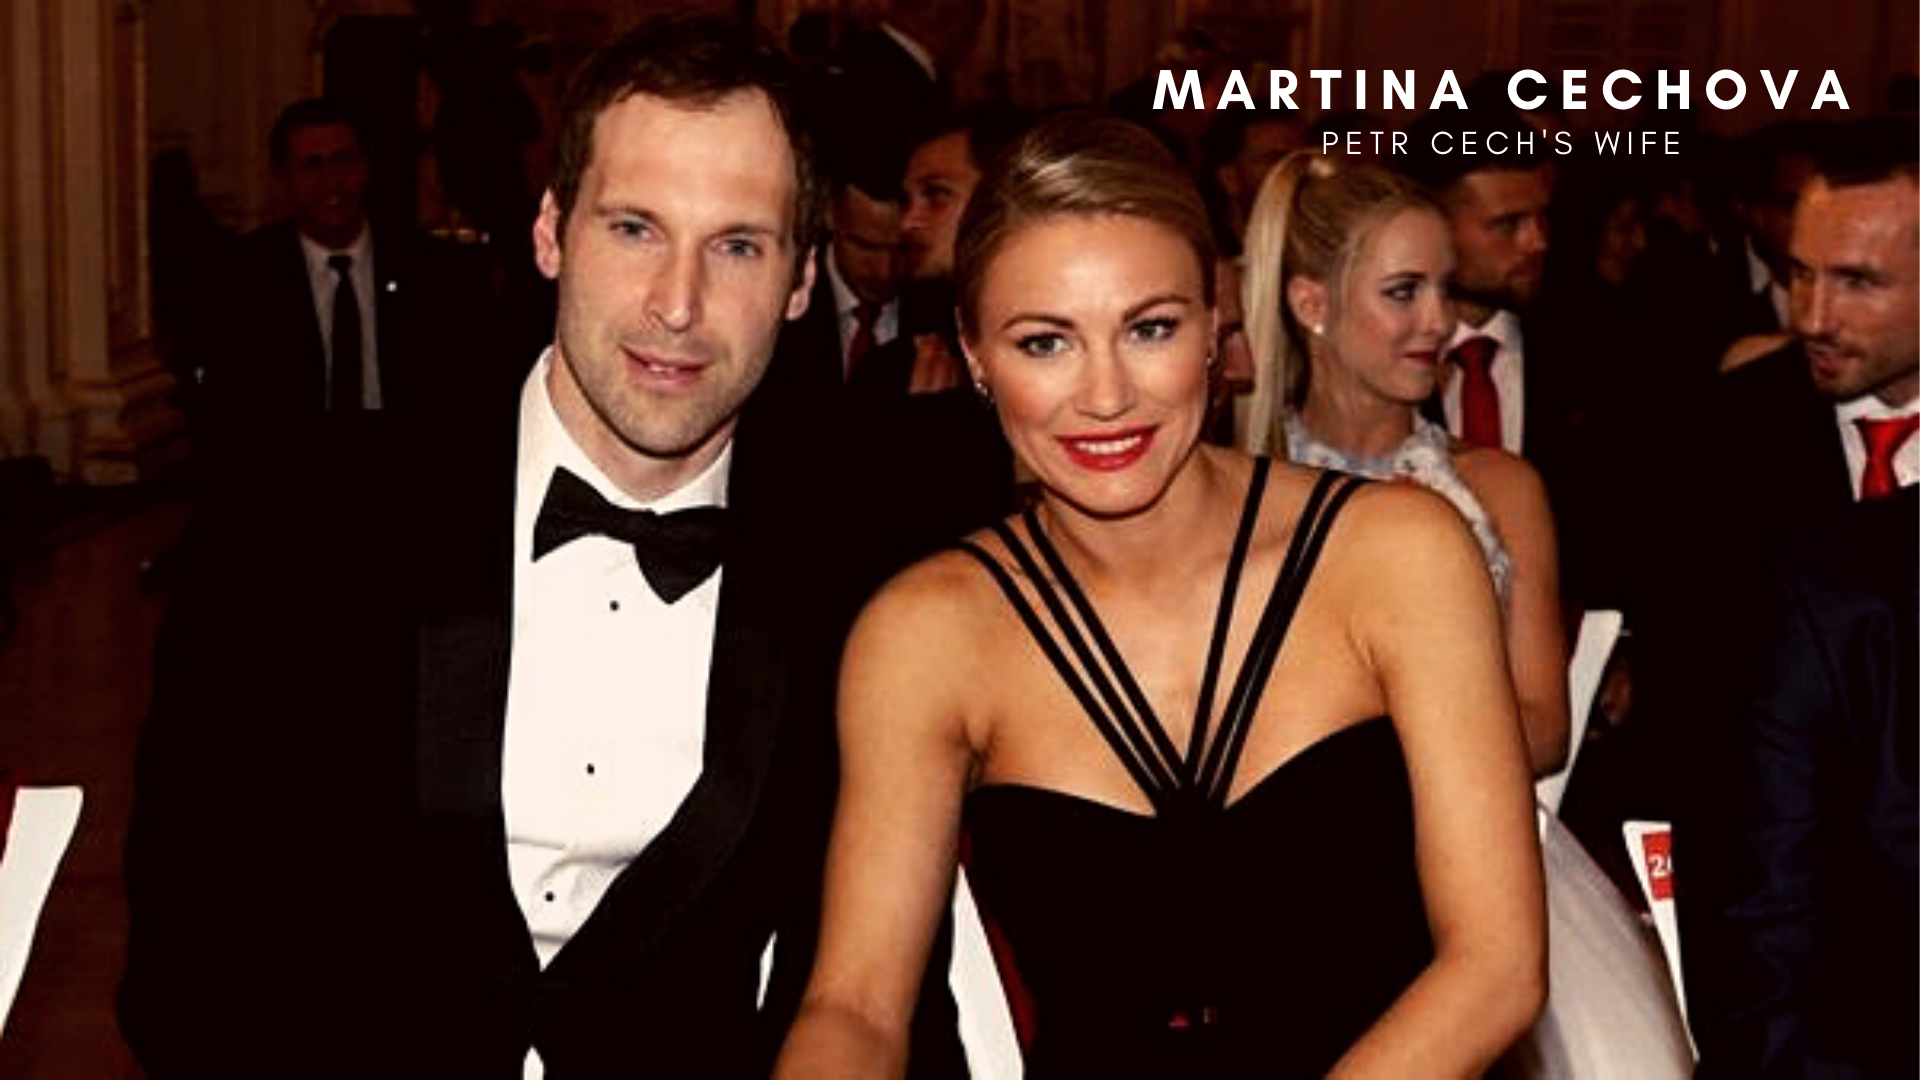 Petr Cech with his wife Martina Cechova. (Picture was taken from SportMob)